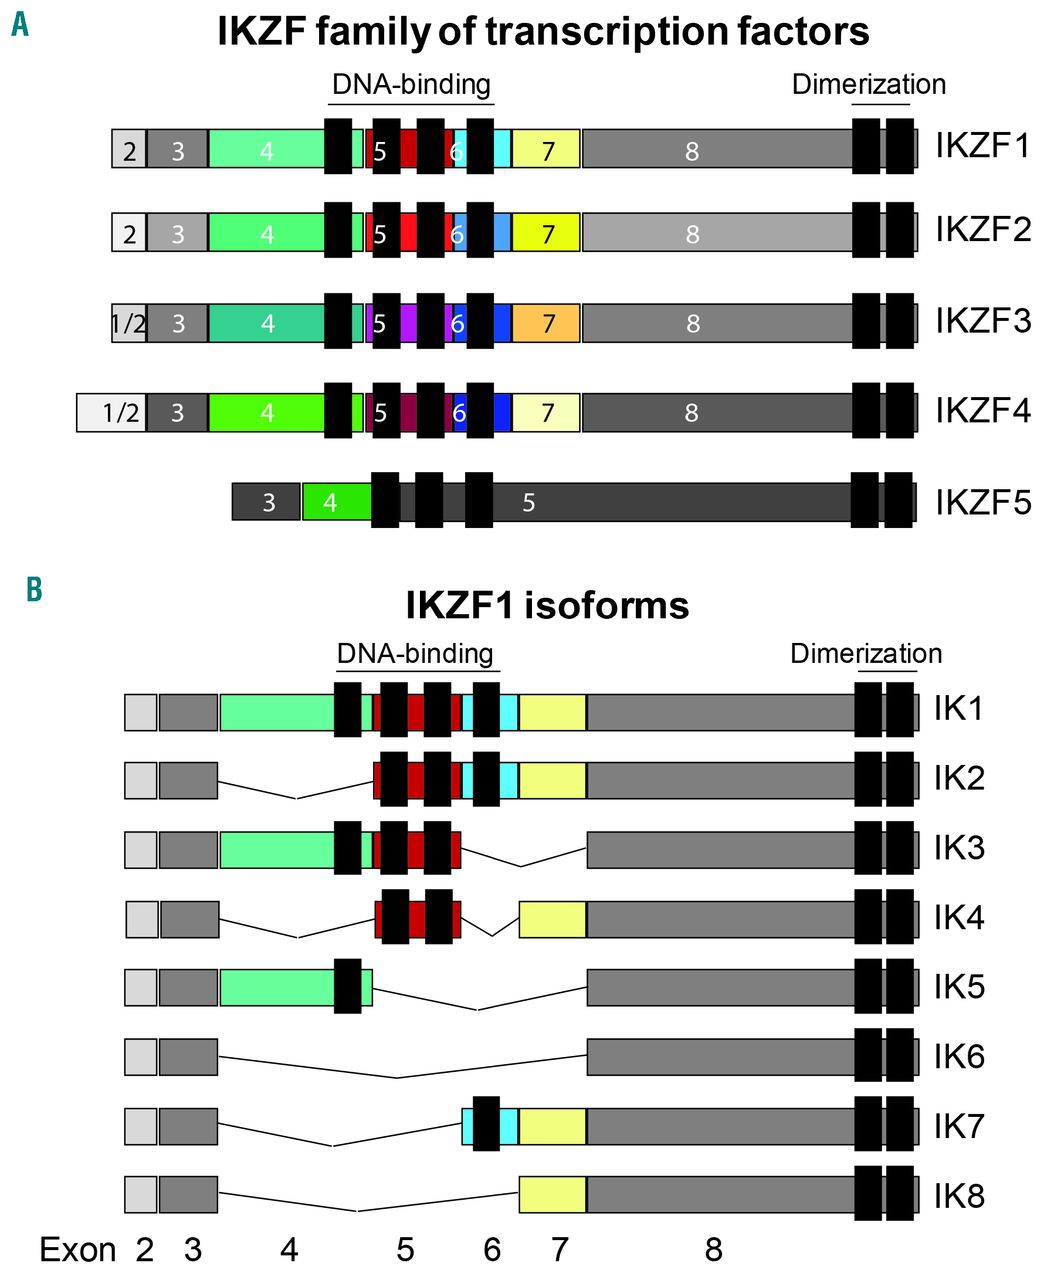 Family of IKZF transcription factors and IKZF1 isoforms.